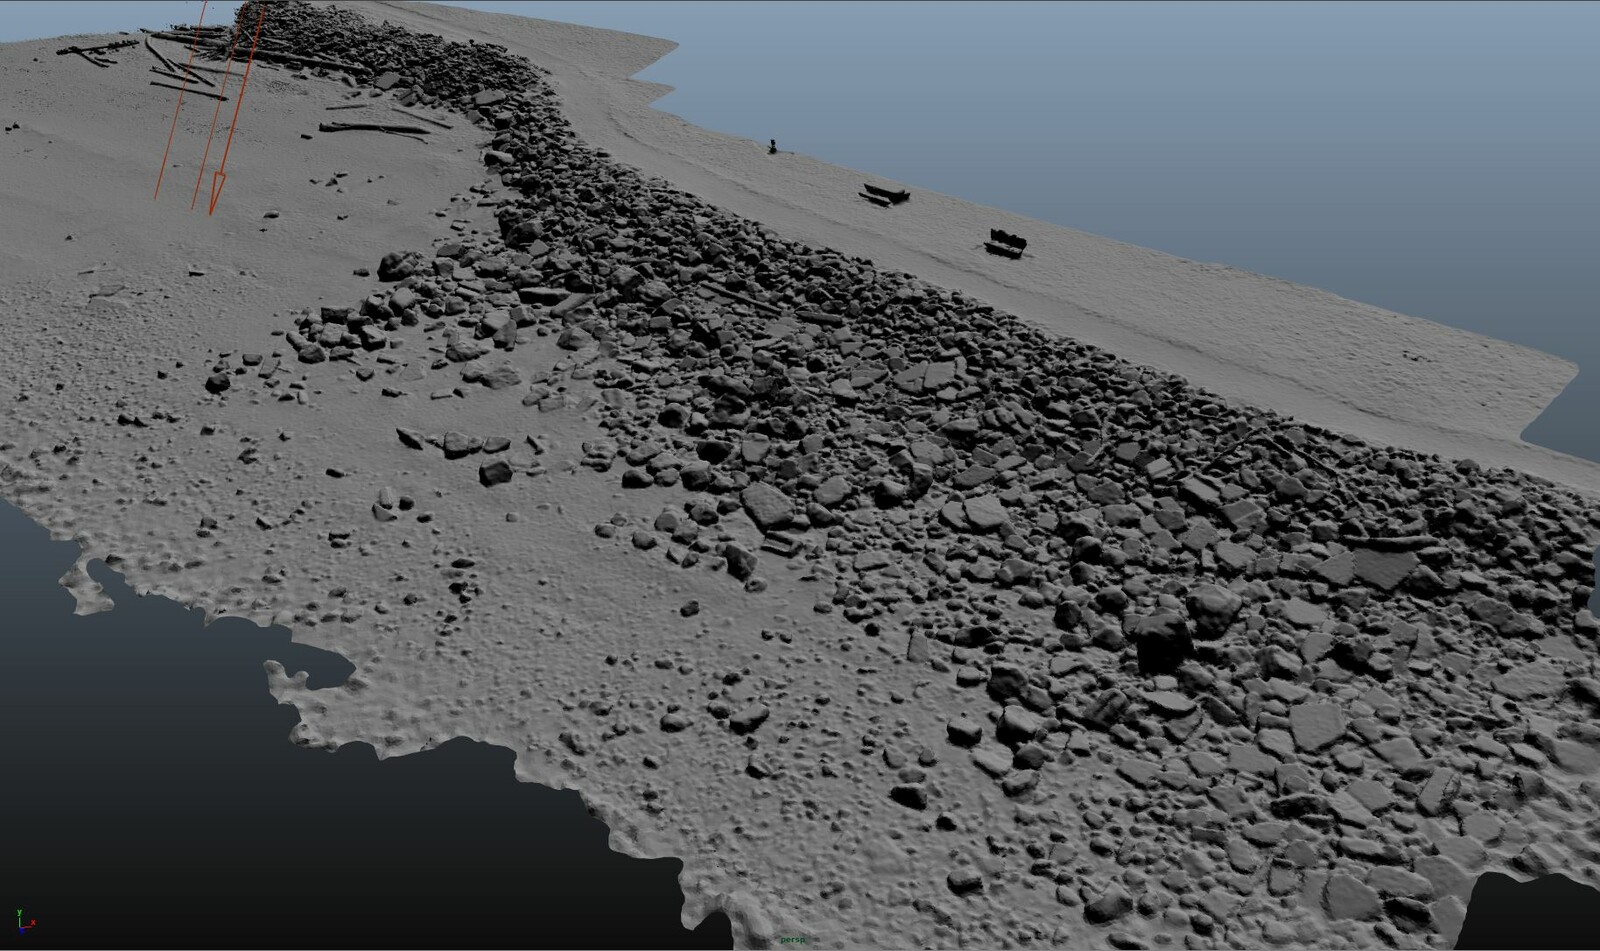 Point Clouds converted into a mesh and ready for topology